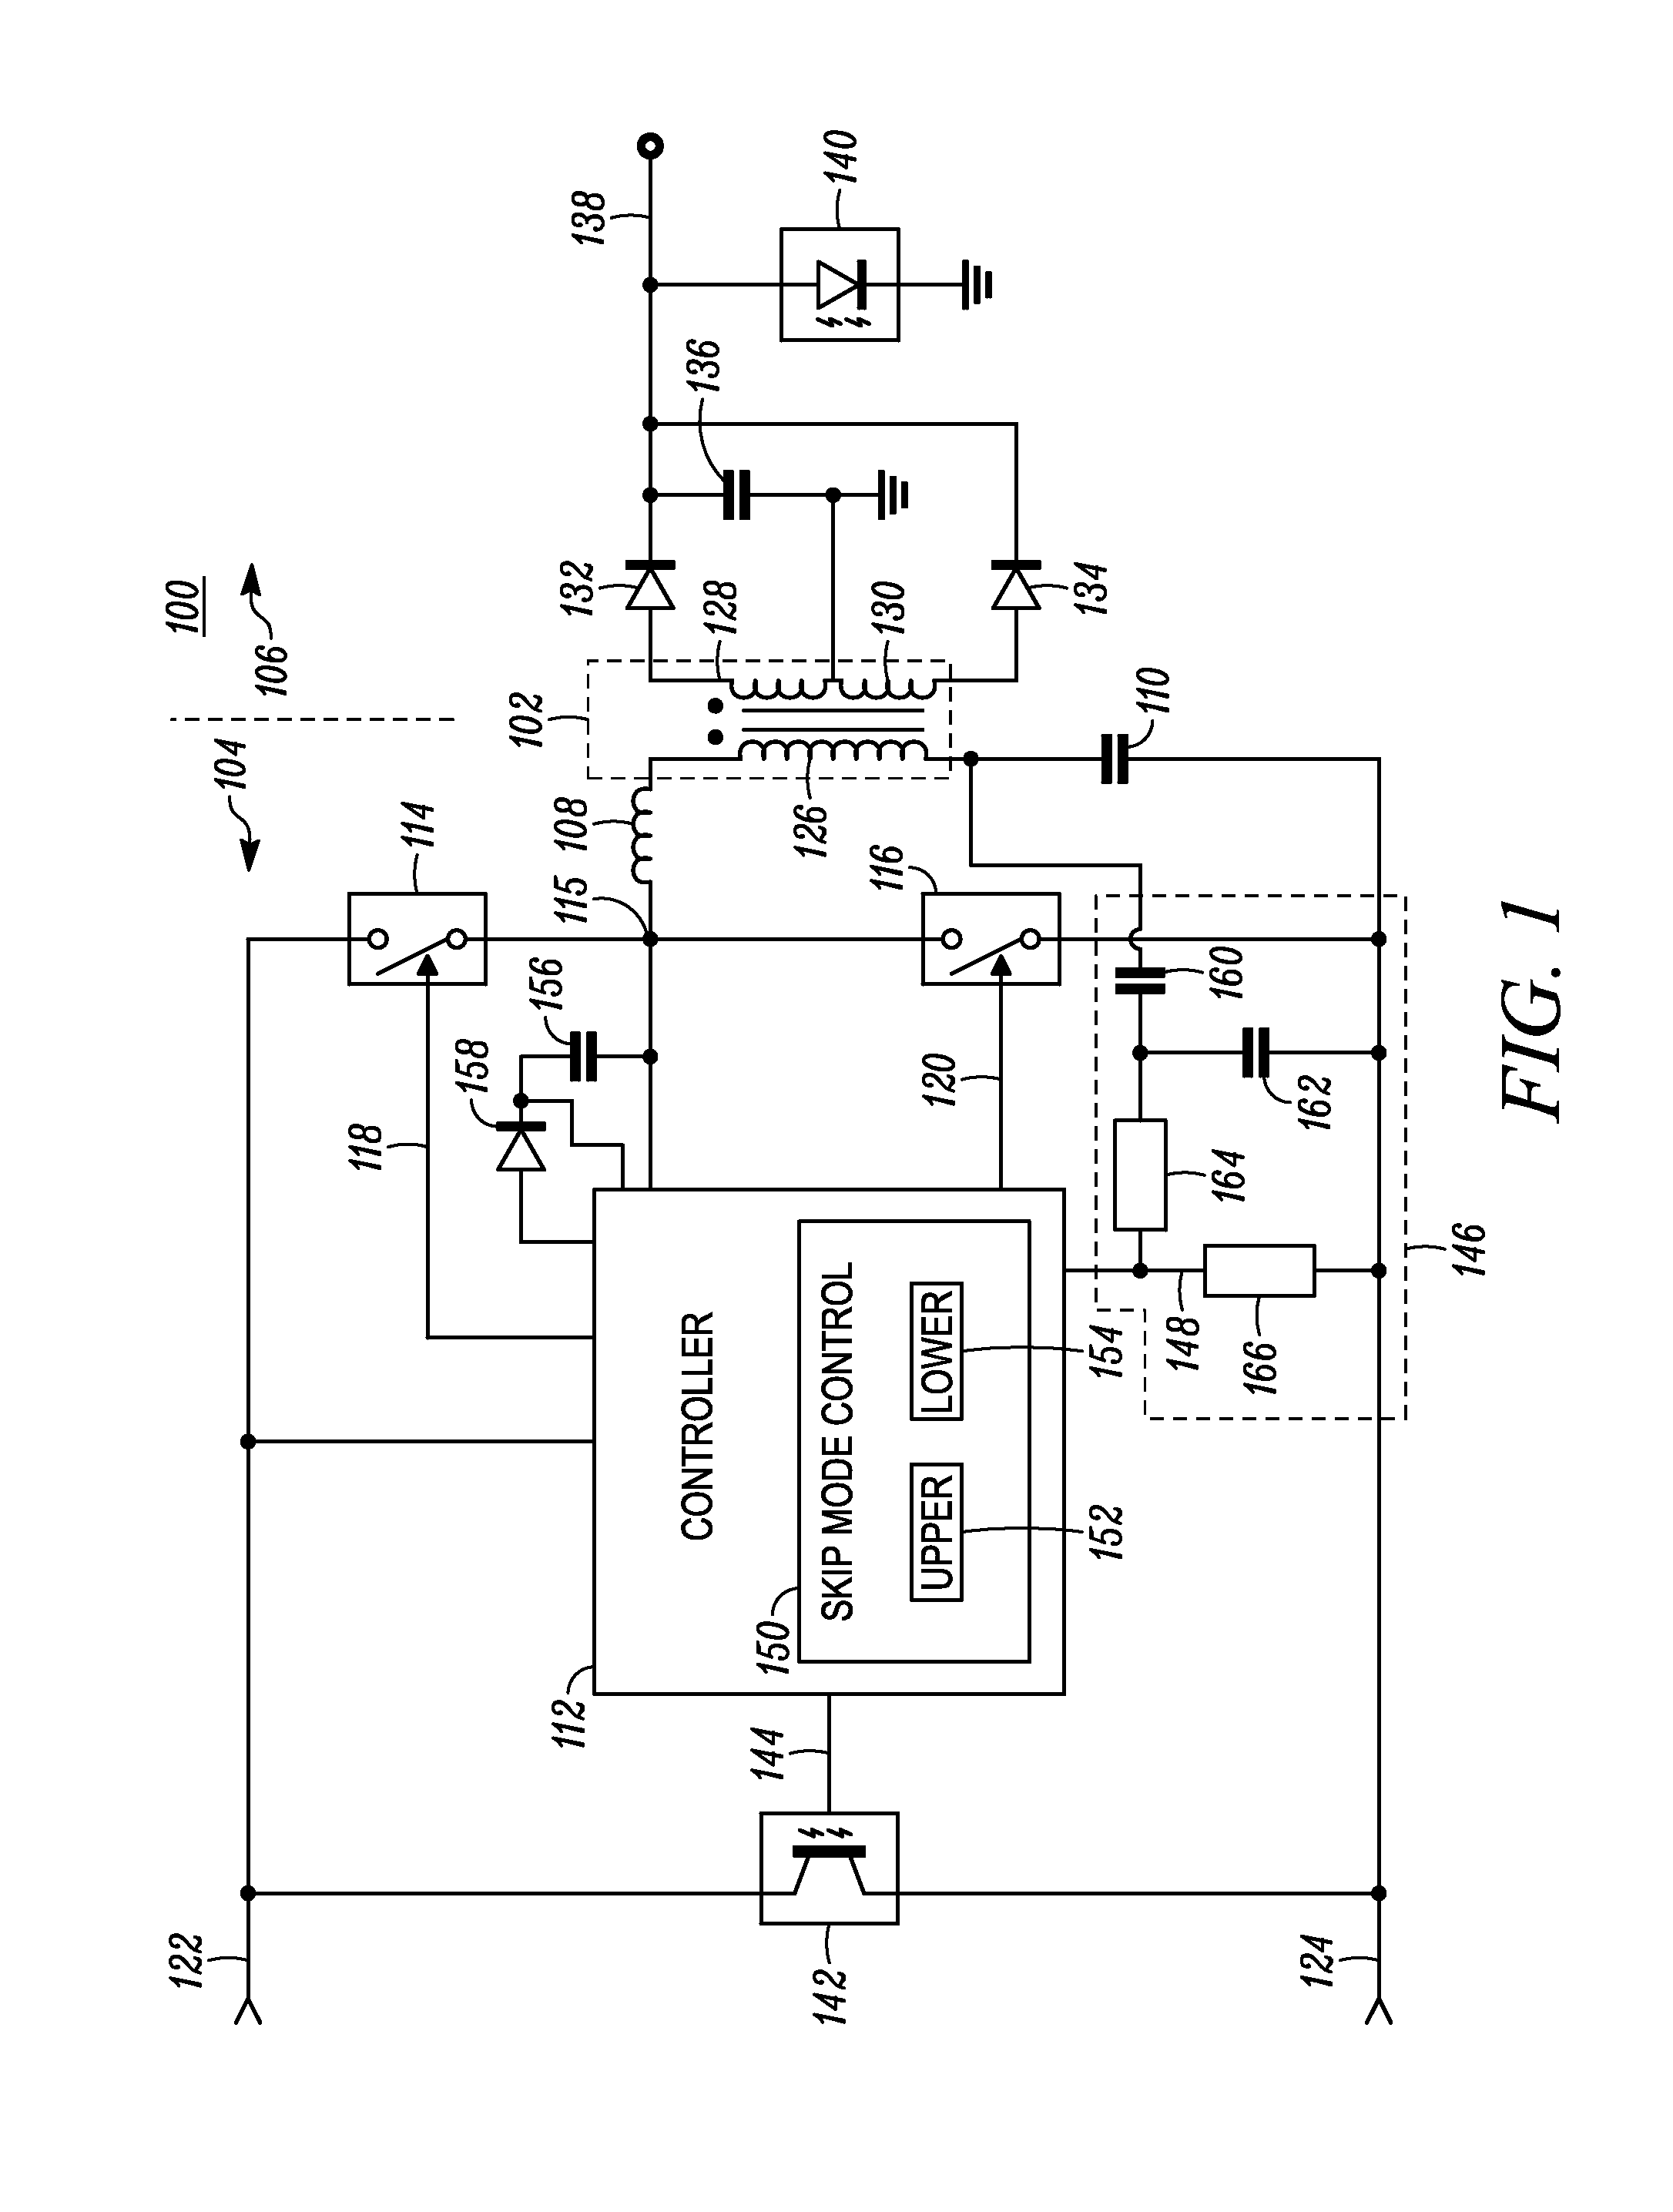 Method and apparatus for dedicated skip mode for resonant converters